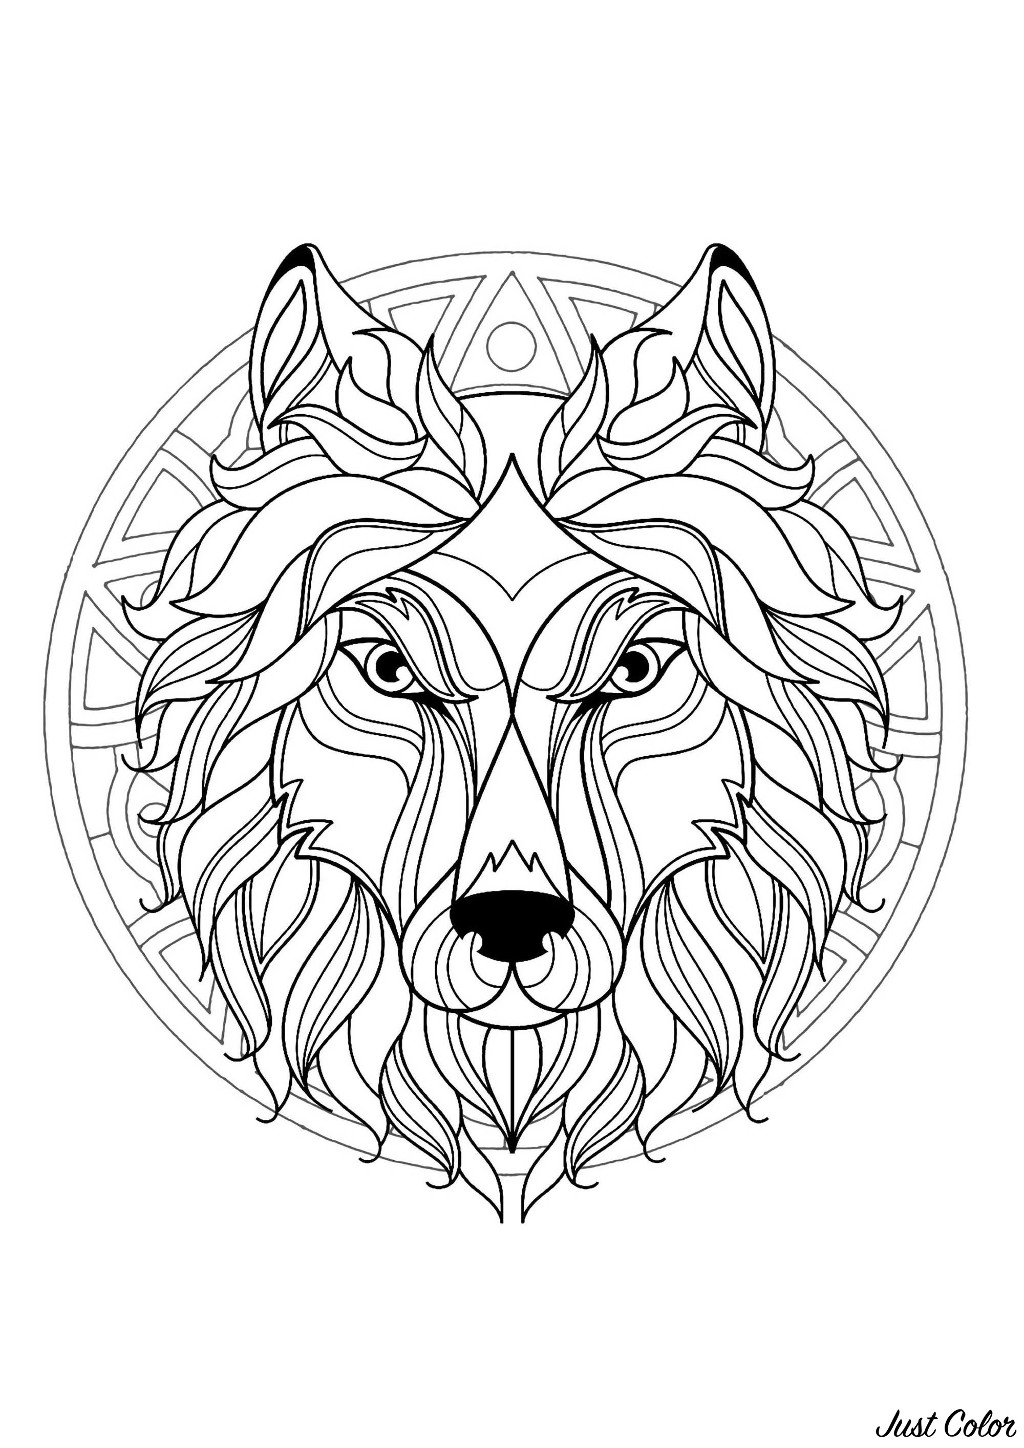 Complex Mandala coloring page with wolf head 3 - Difficult Mandalas (for adults) - 100% Mandalas 